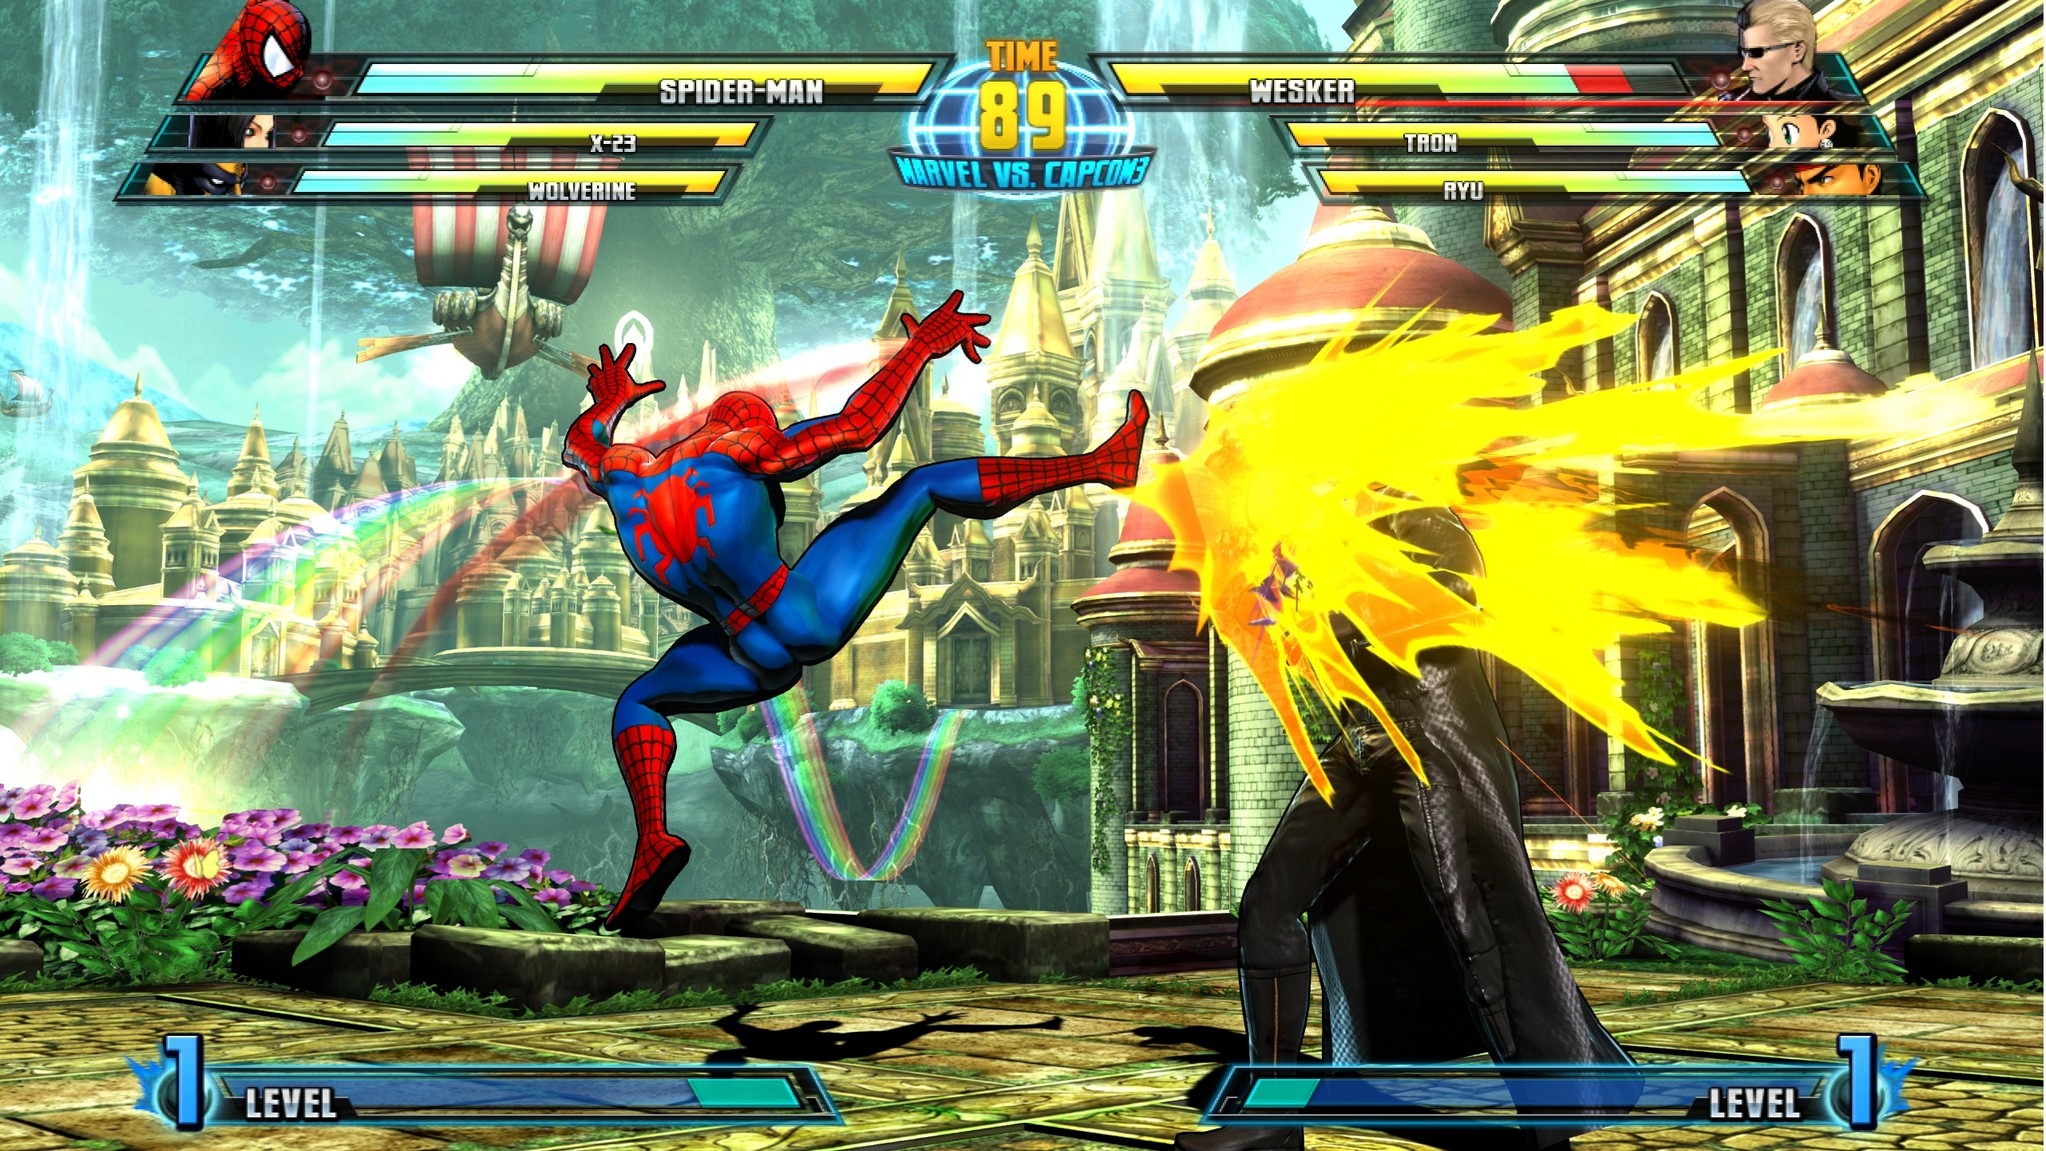 Spider-Man And Wesker Screens Web Swing Over - Siliconera